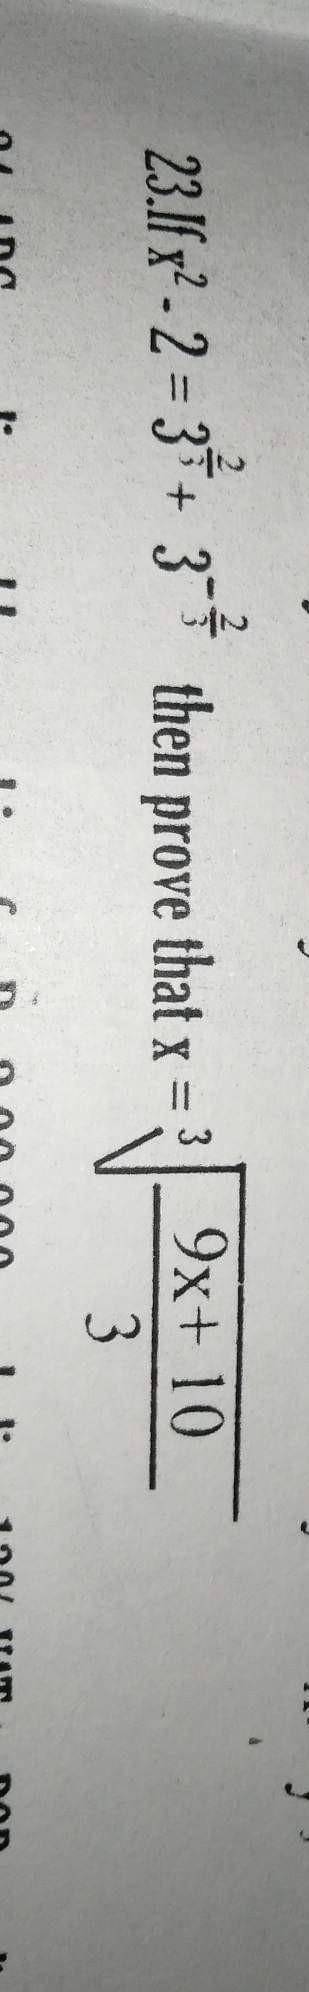 Solve this help me It is the question of class 10 Maths